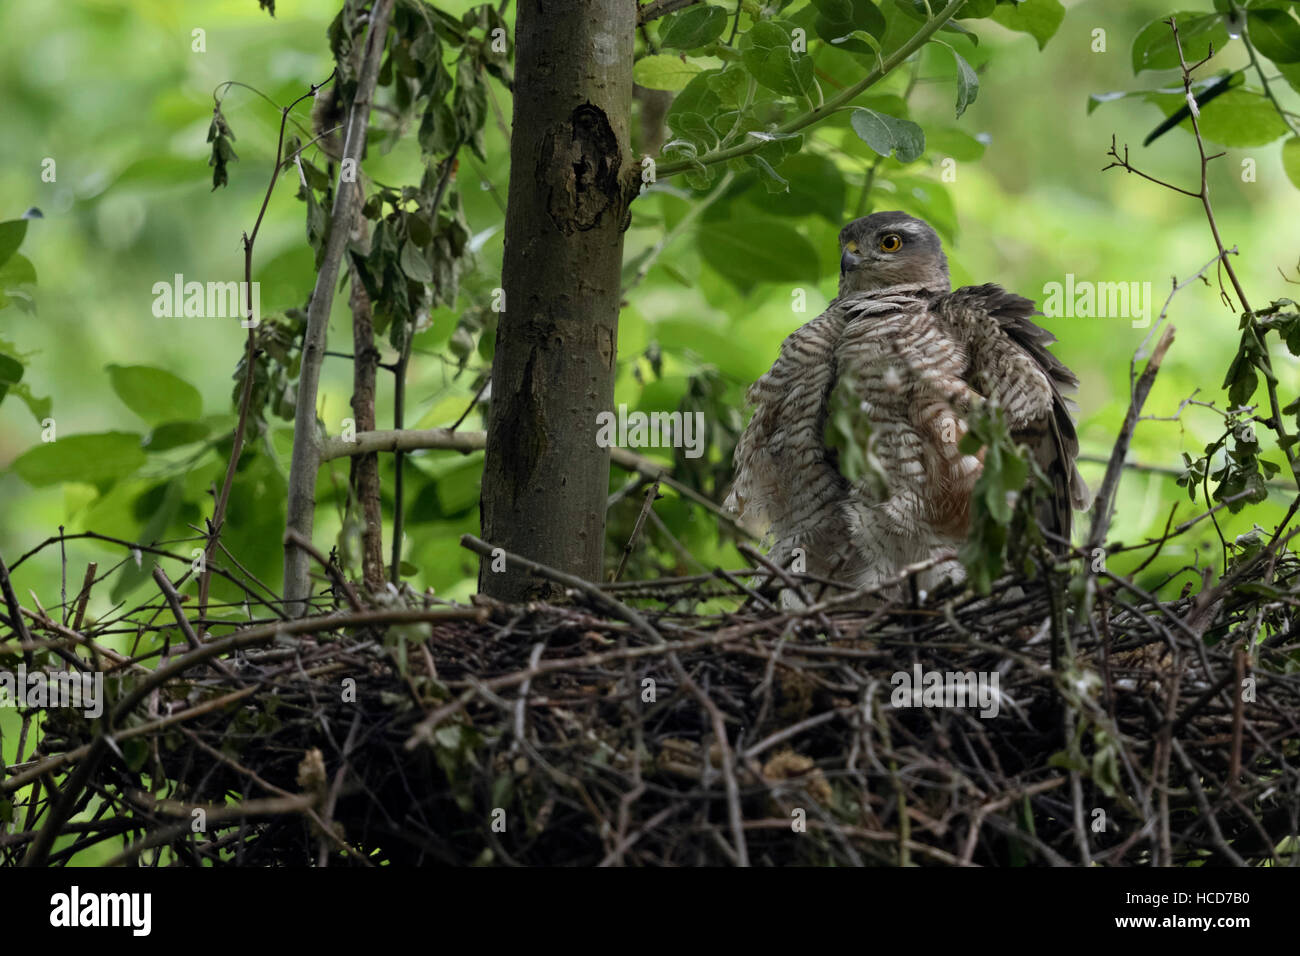 Sparrowhawk / Sperber ( Accipiter nisus ), female adult, resting on the edge of its hidden nest, ruffling its feathers, frontal view. Stock Photo